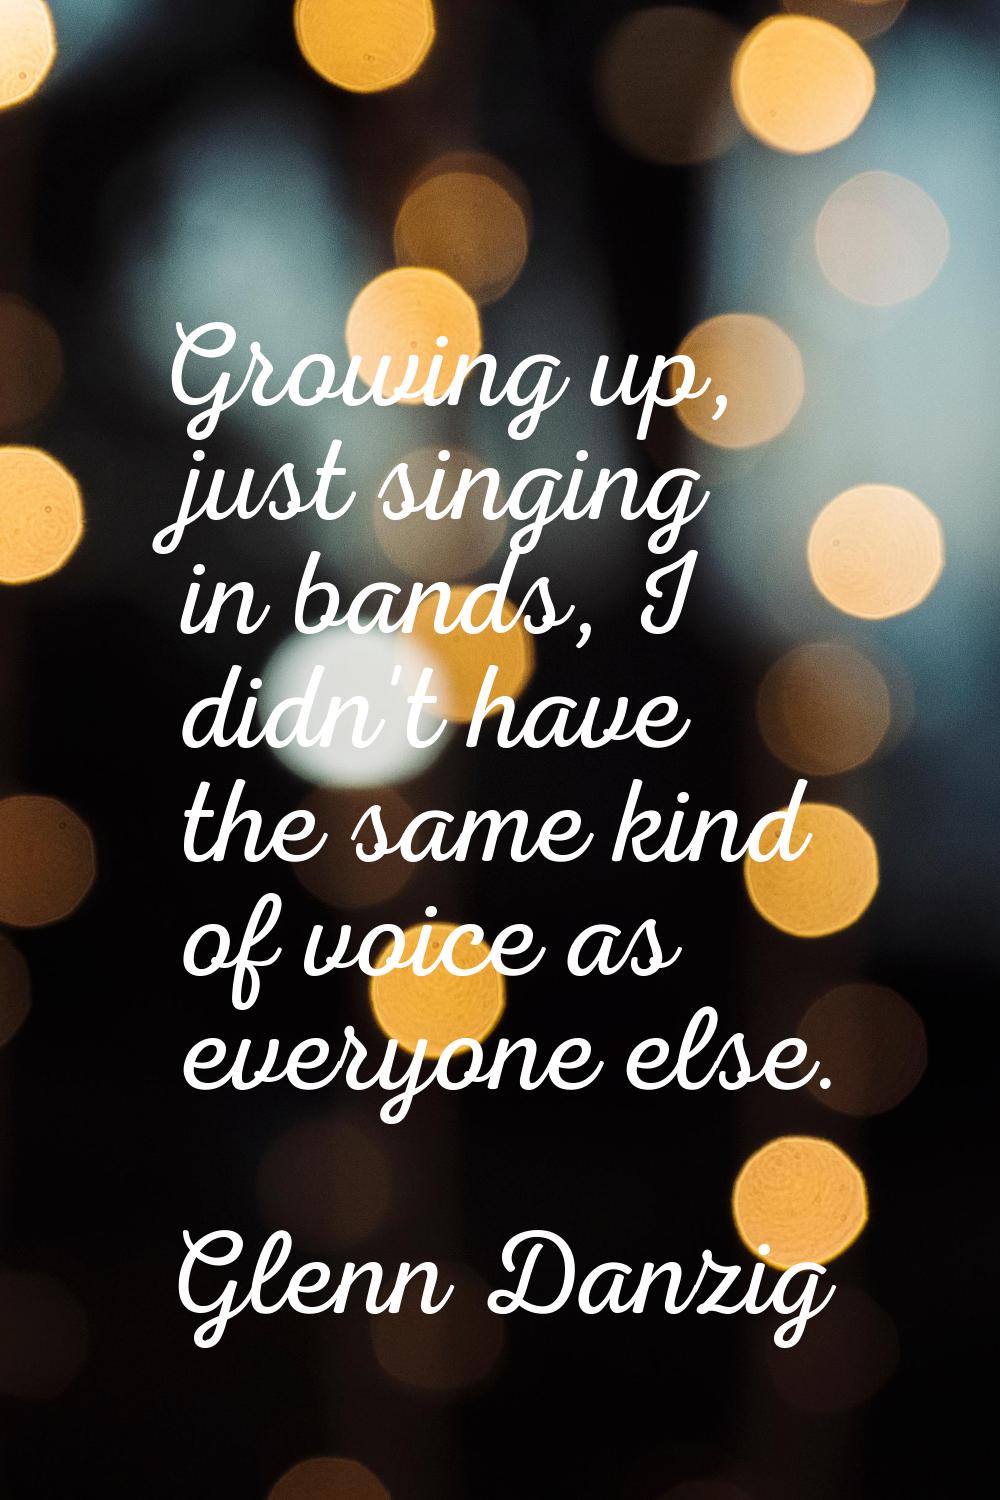 Growing up, just singing in bands, I didn't have the same kind of voice as everyone else.